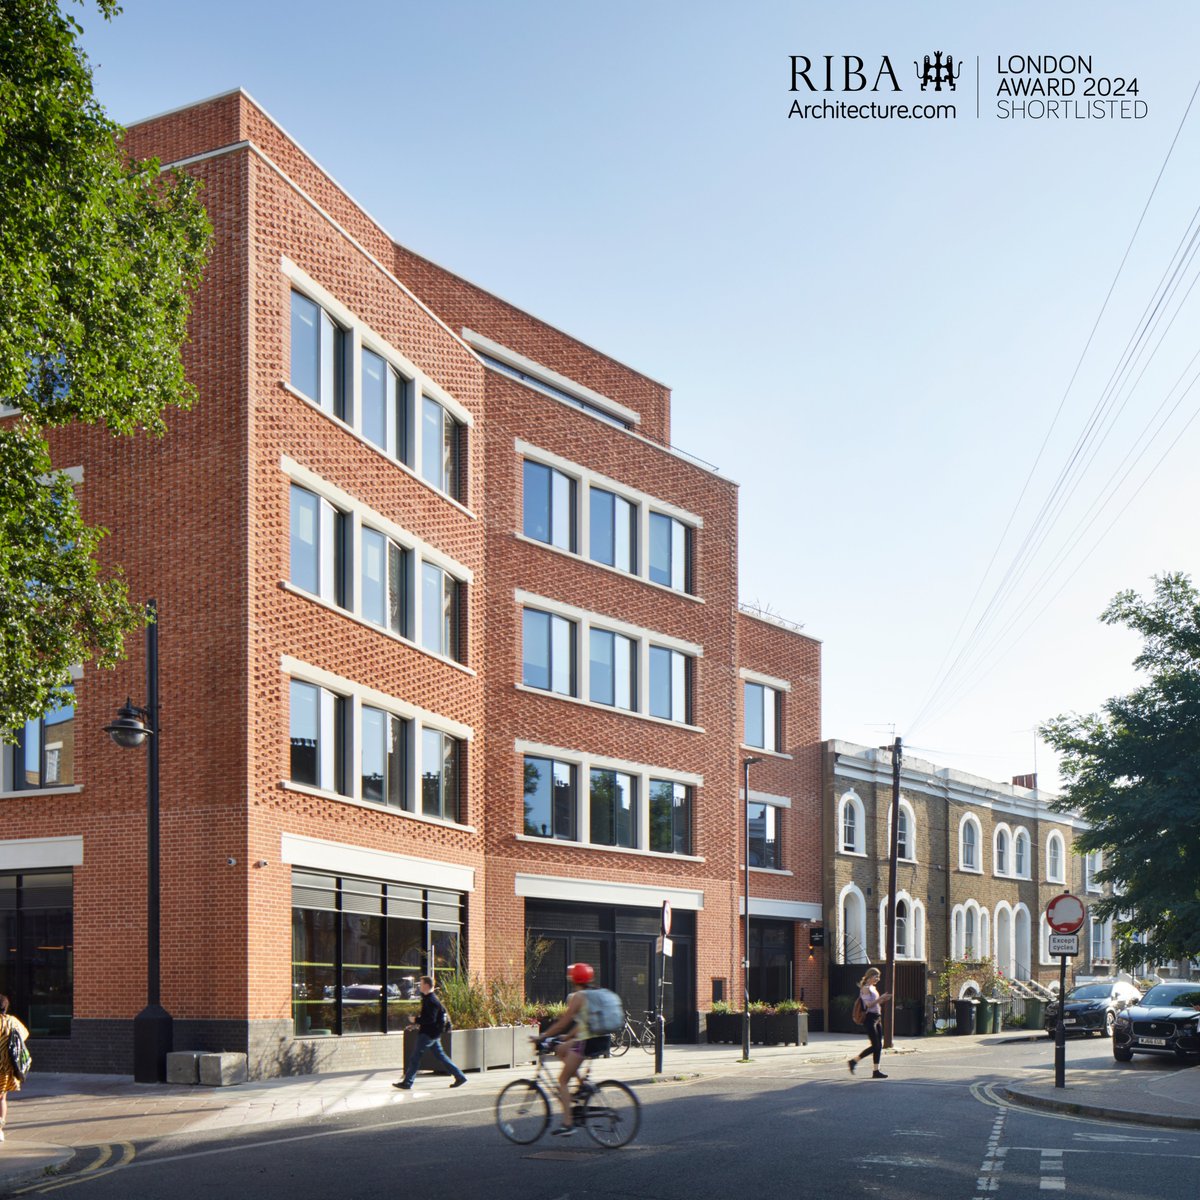 The Department Store Studios, our neighbourhood workspace building designed and developed by the practice as a natural addition to our offices next door at The Department Store, has been shortlisted for a 2024 @RIBA London Award. 

Winners are announced in the spring!
#RIBAawards